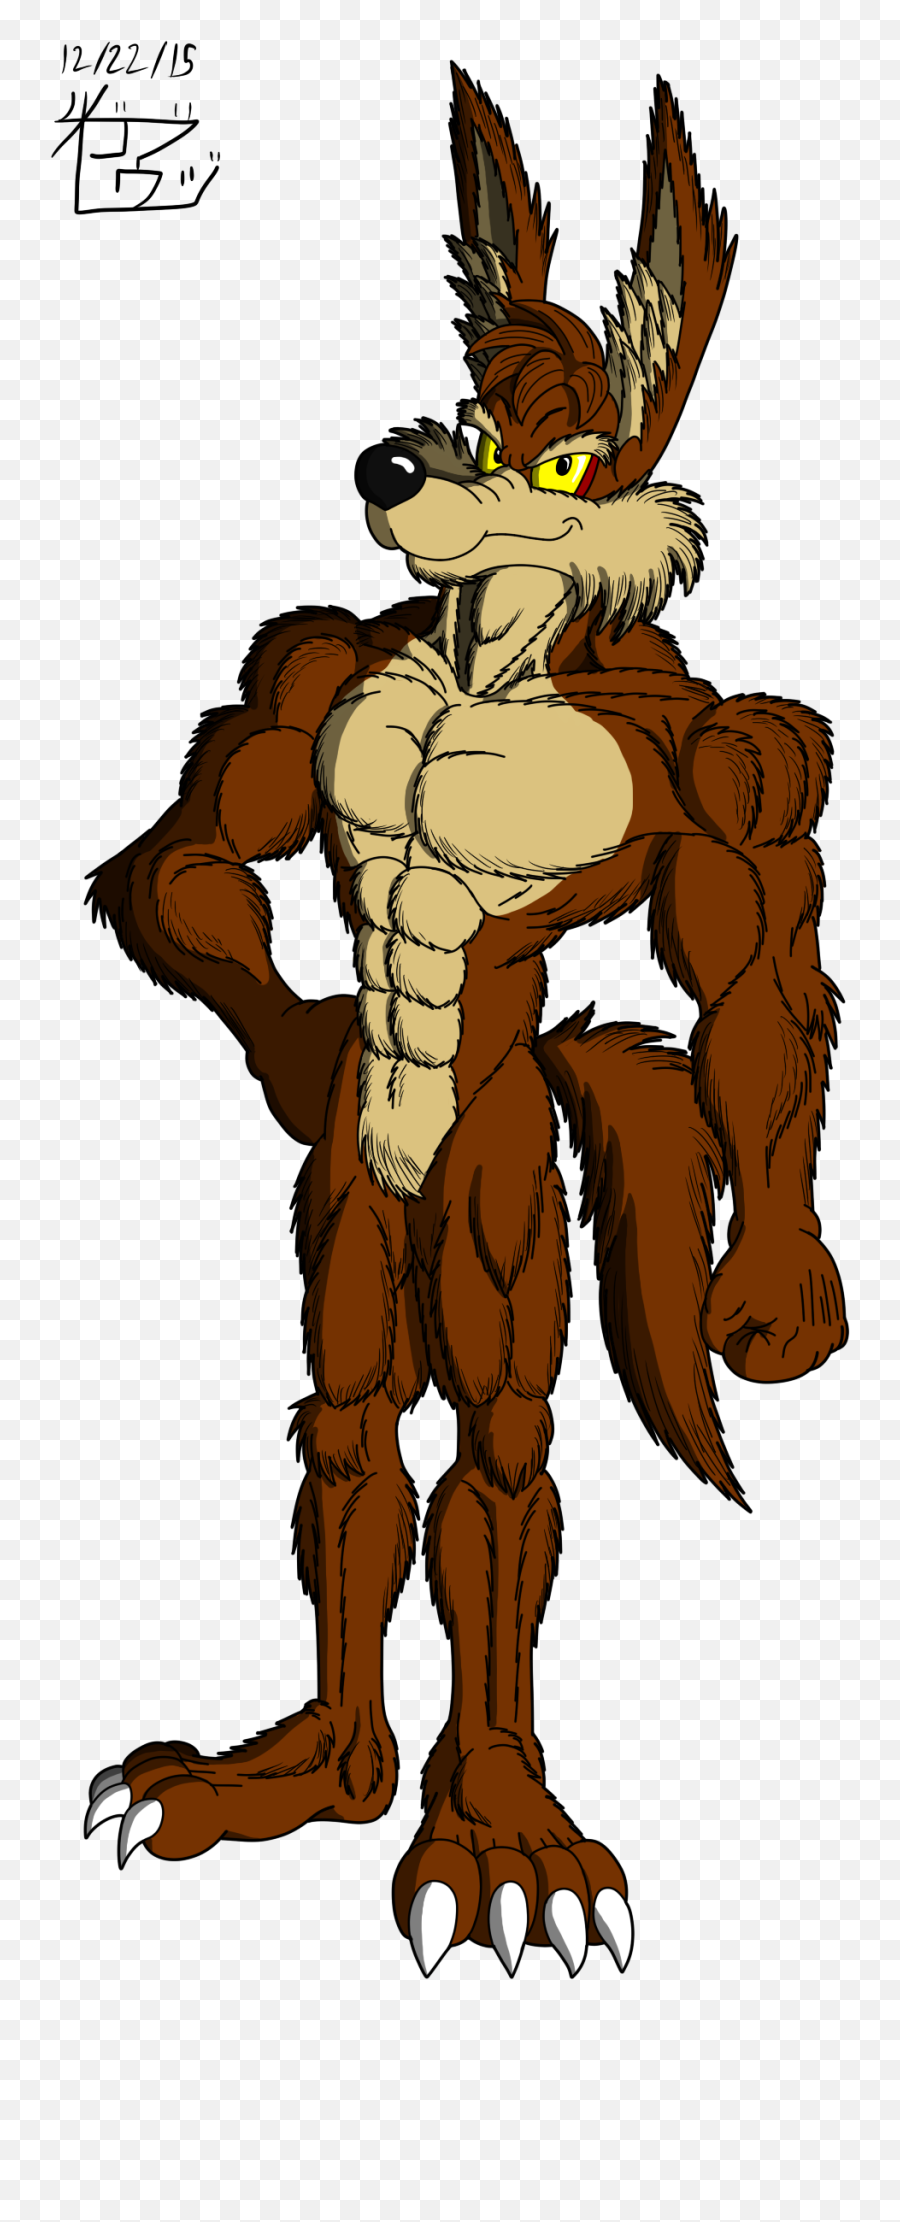 Wile E Coyote Muscle Png Image With No - Road Runner Muscle Cartoon Emoji,Brown Muscle Emoji